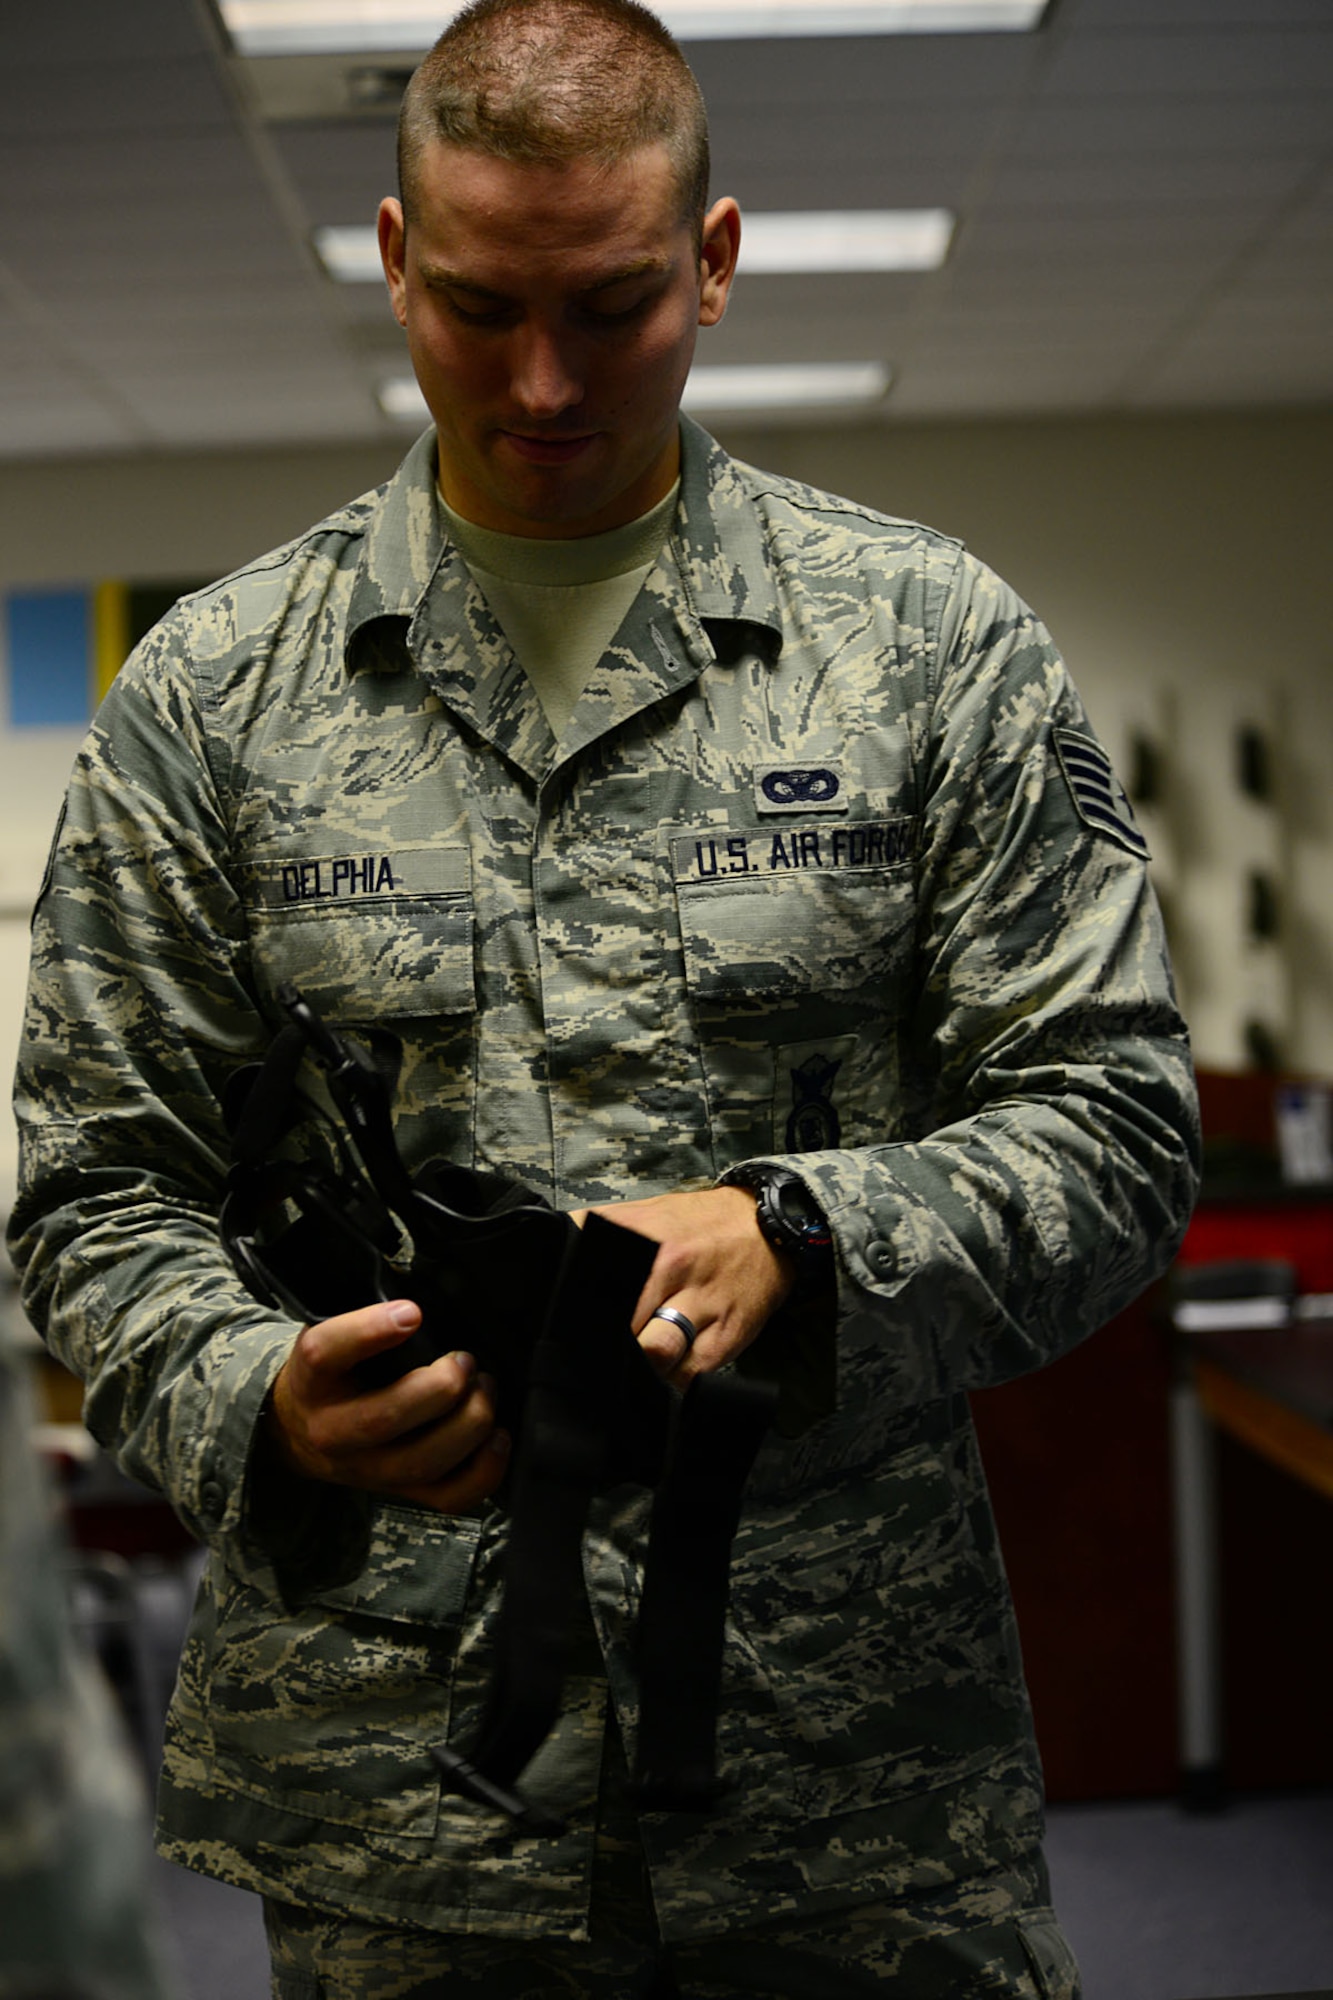 Staff Sgt. William Delphia inspects an M-9 berretta holster before the firing portion of class  Aug. 13, 2013, at Langley Air Force Base, Va. The CATM classes are broken down into a class portion in the morning, and a firing portion in the afternoon. Delphia is a 633rd Security Forces Squadron combat arms training and maintenance instructor.